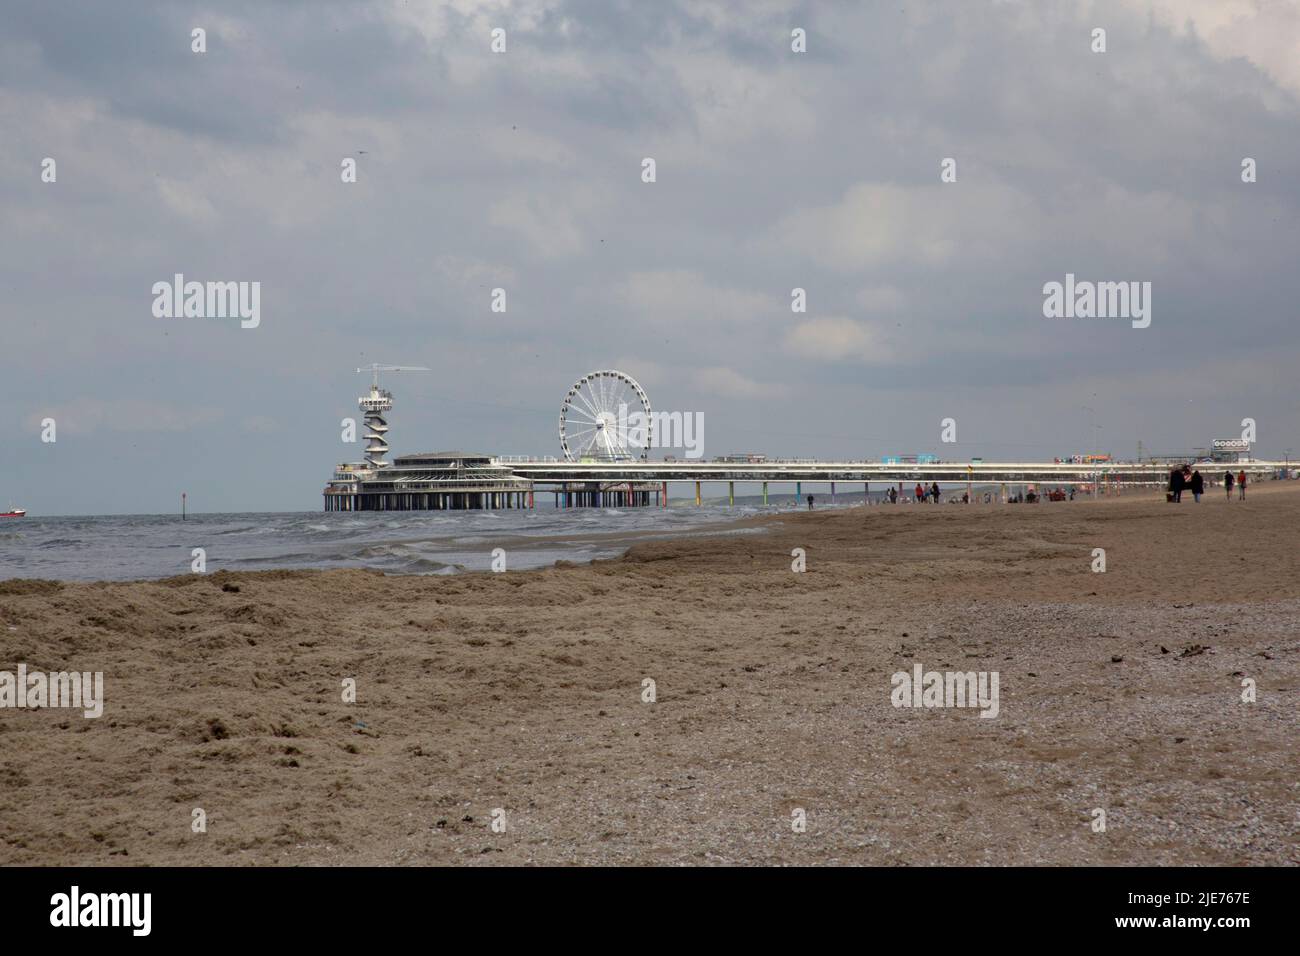 The Scheveningen Pier In The Hague. Netherlands. Stock Photo, Picture and  Royalty Free Image. Image 133169817.